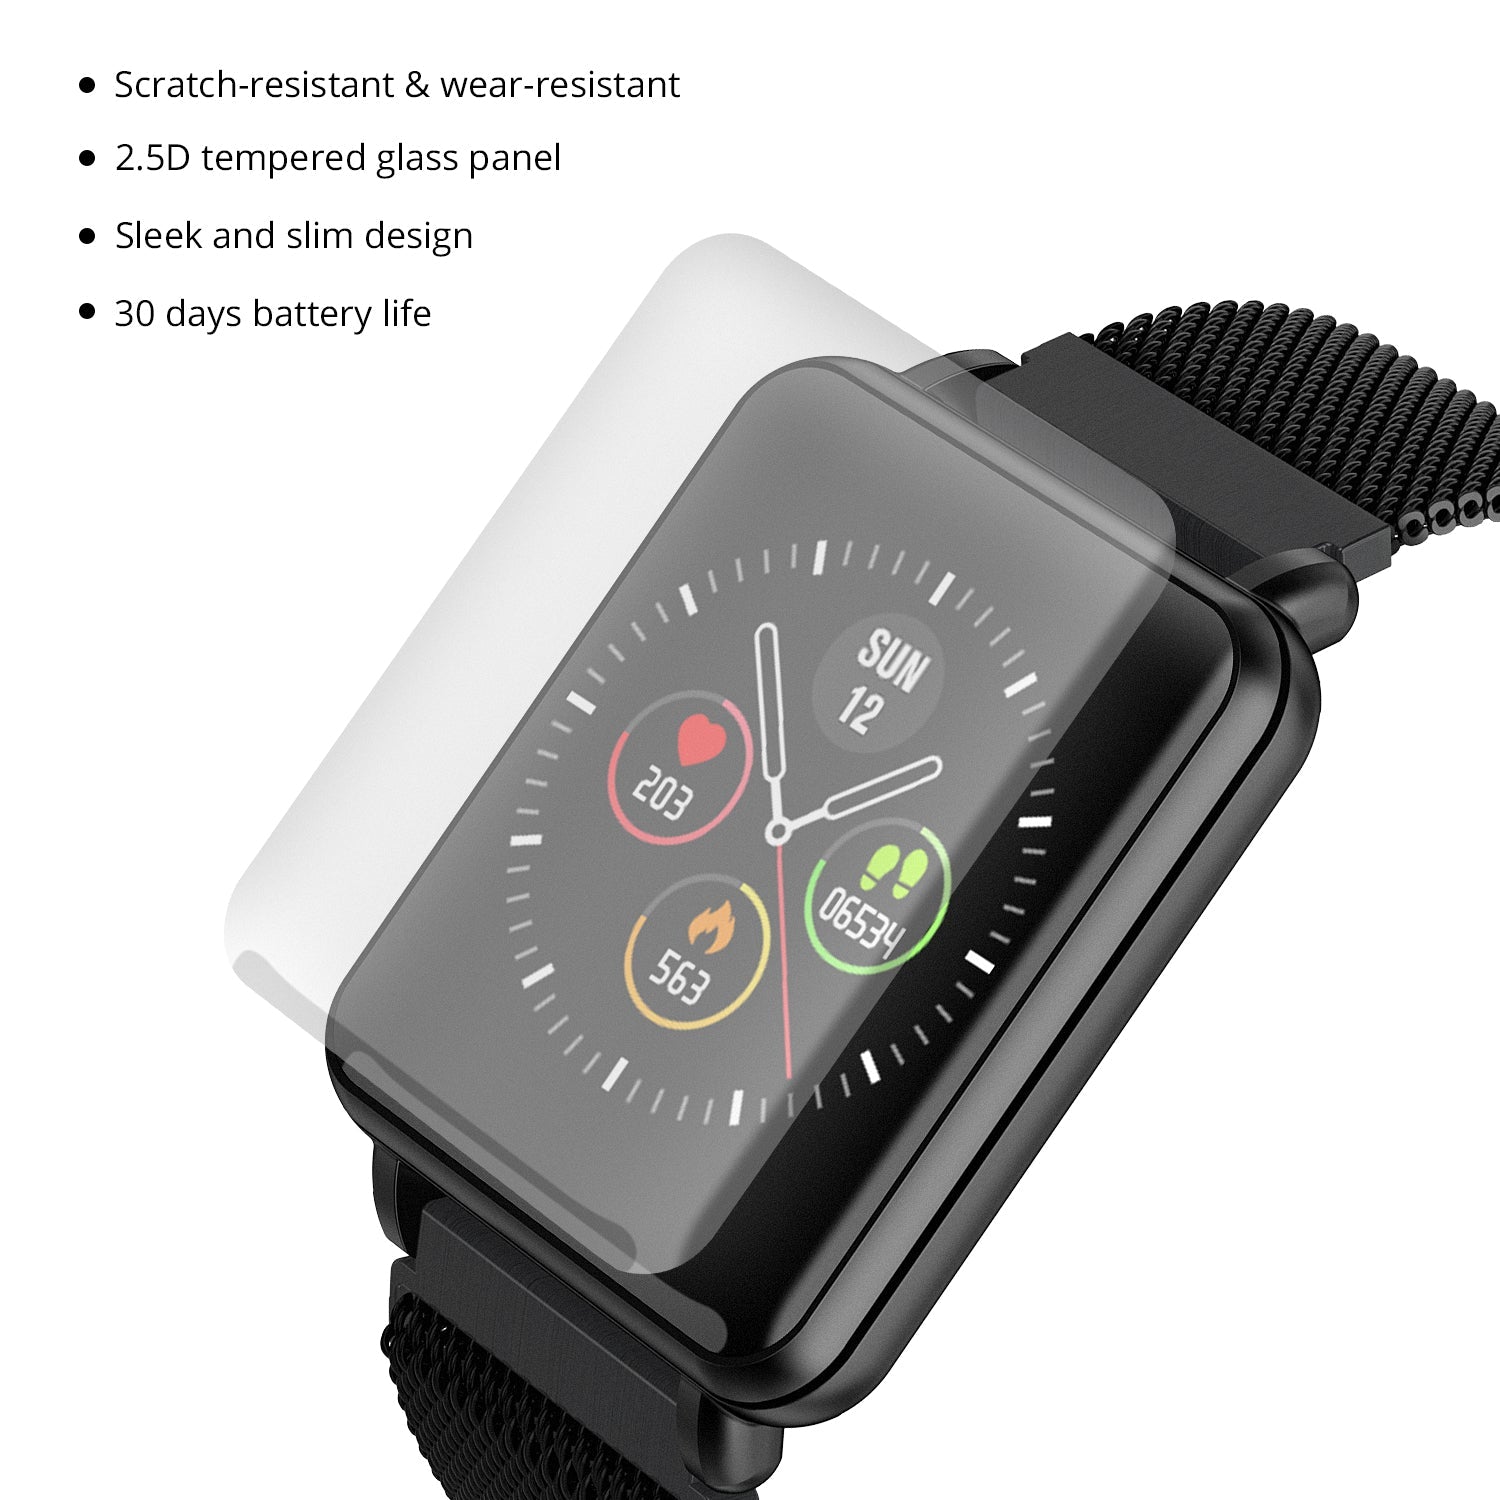 COLMI Smart Watch for Men, IP68 Waterproof Fitness Tracker Compatible with iPhone Android, Bluetooth Pedometer, Heart Rate and Blood Pressure Monitor